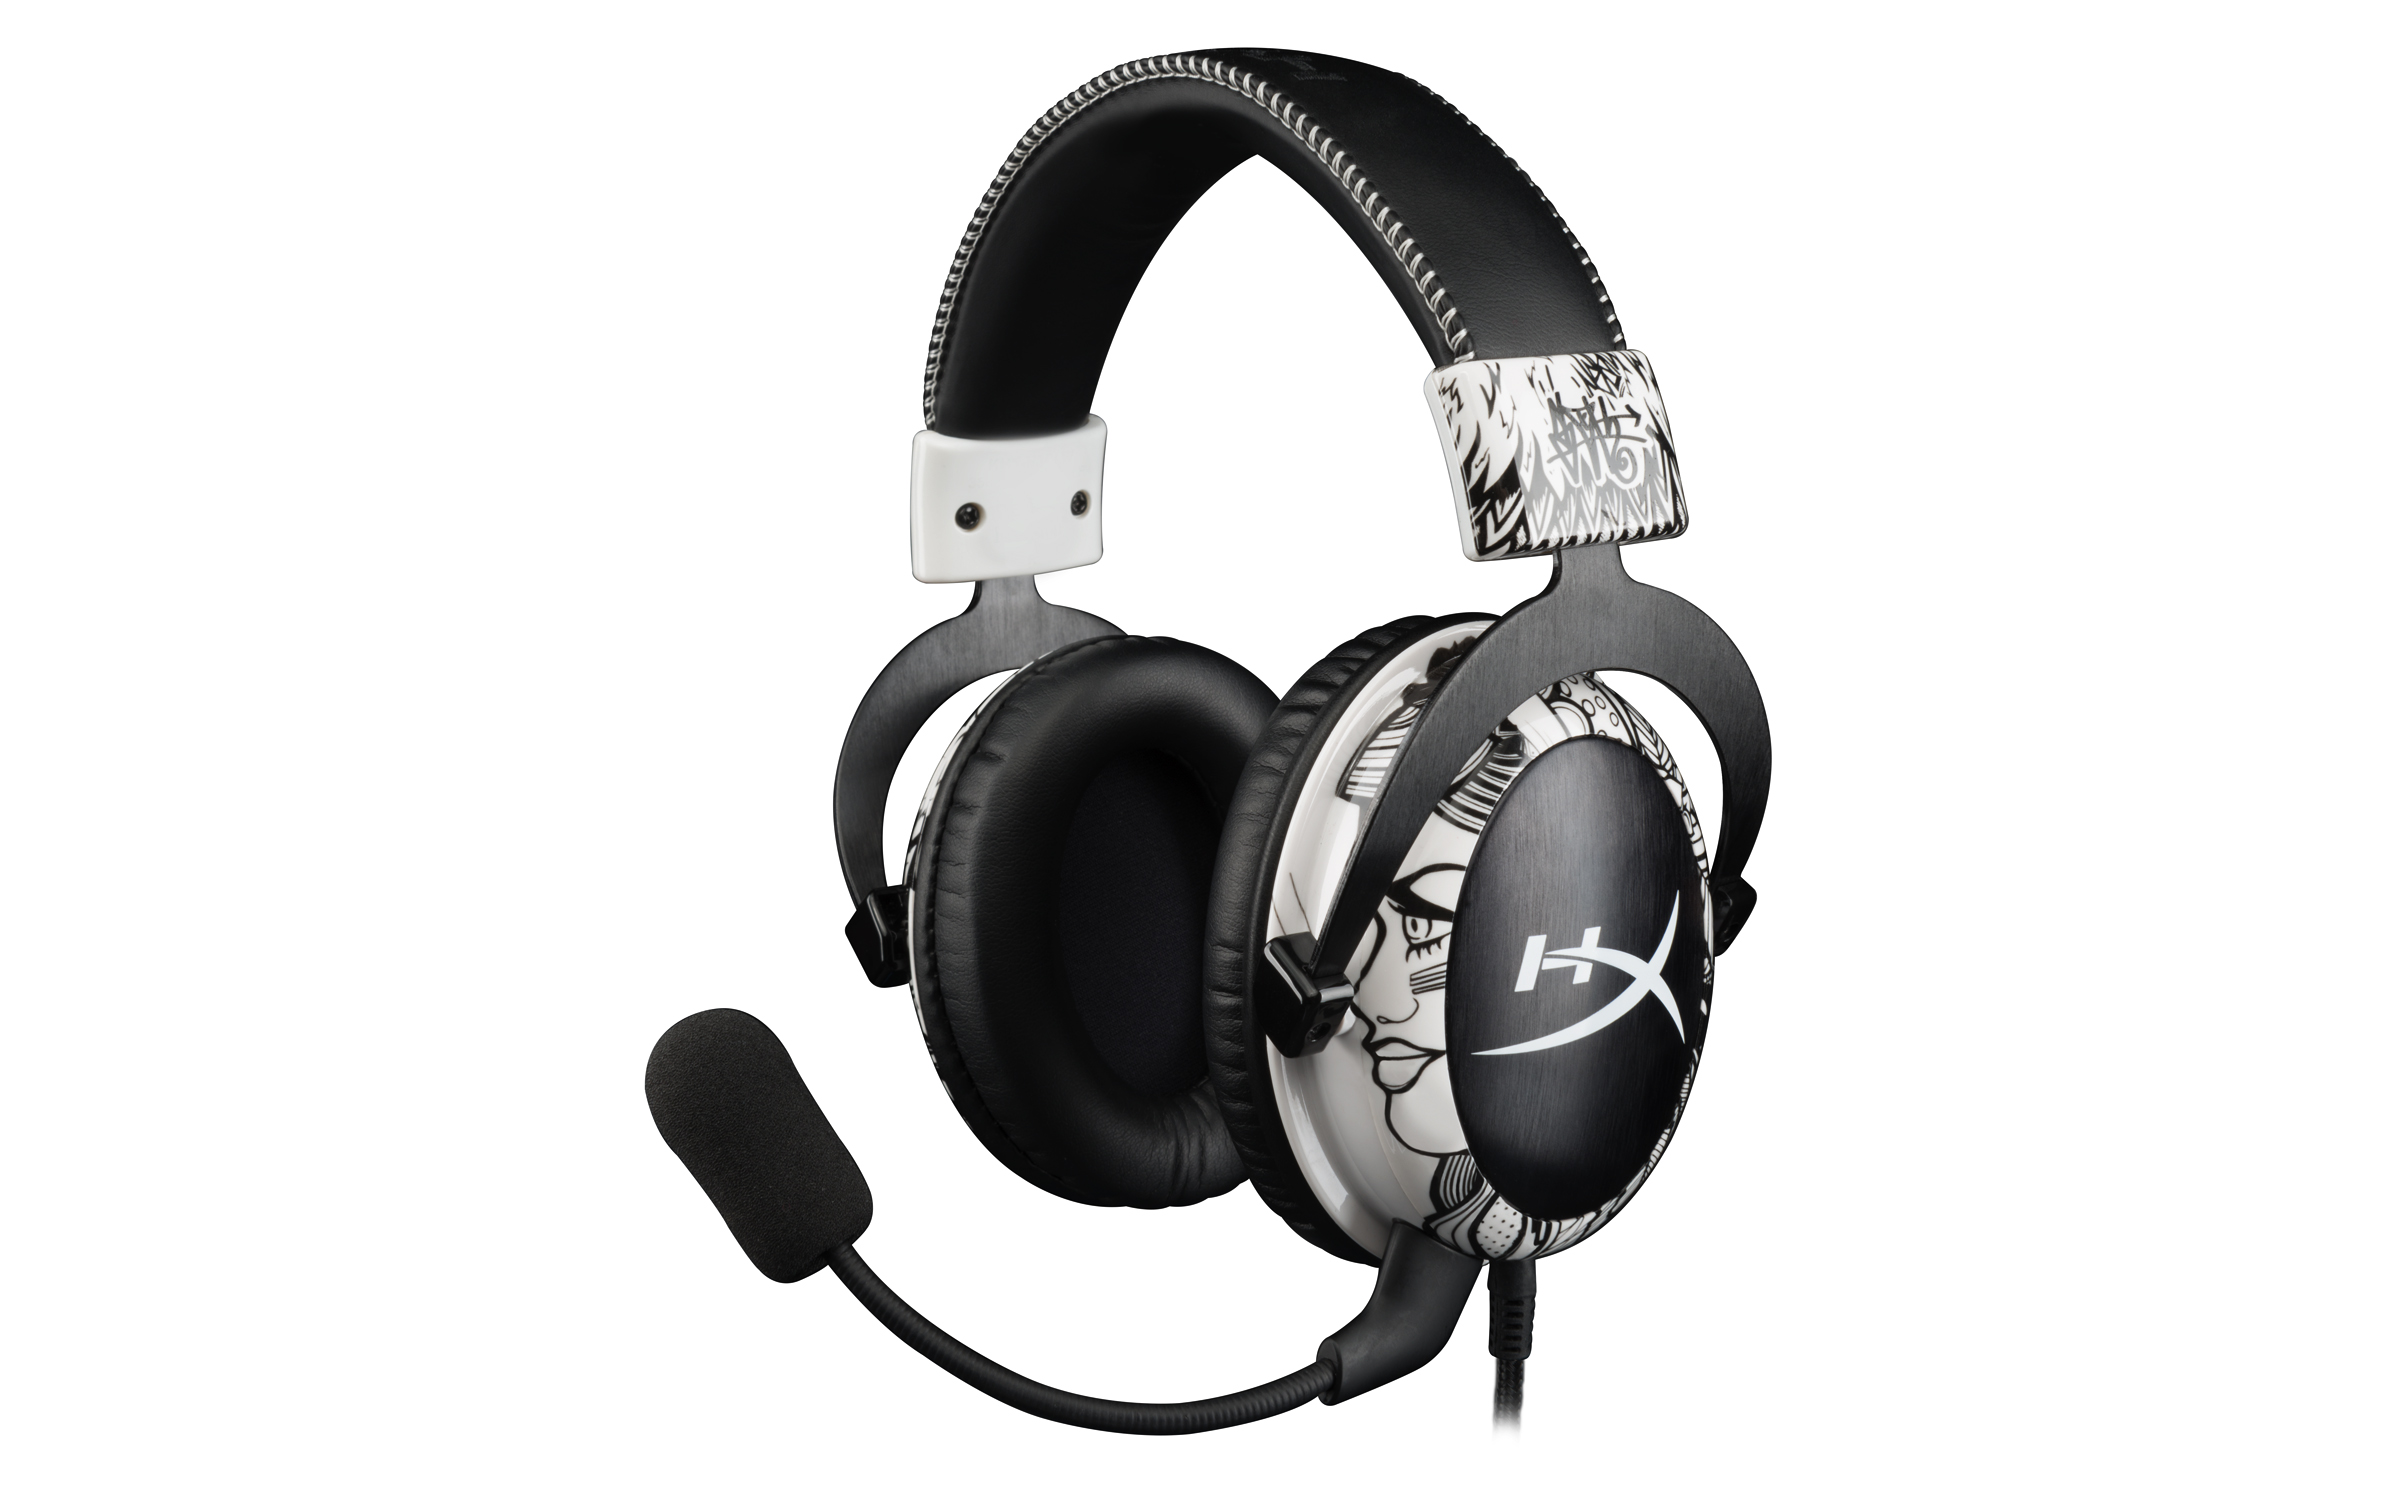 HyperX headset for gamers